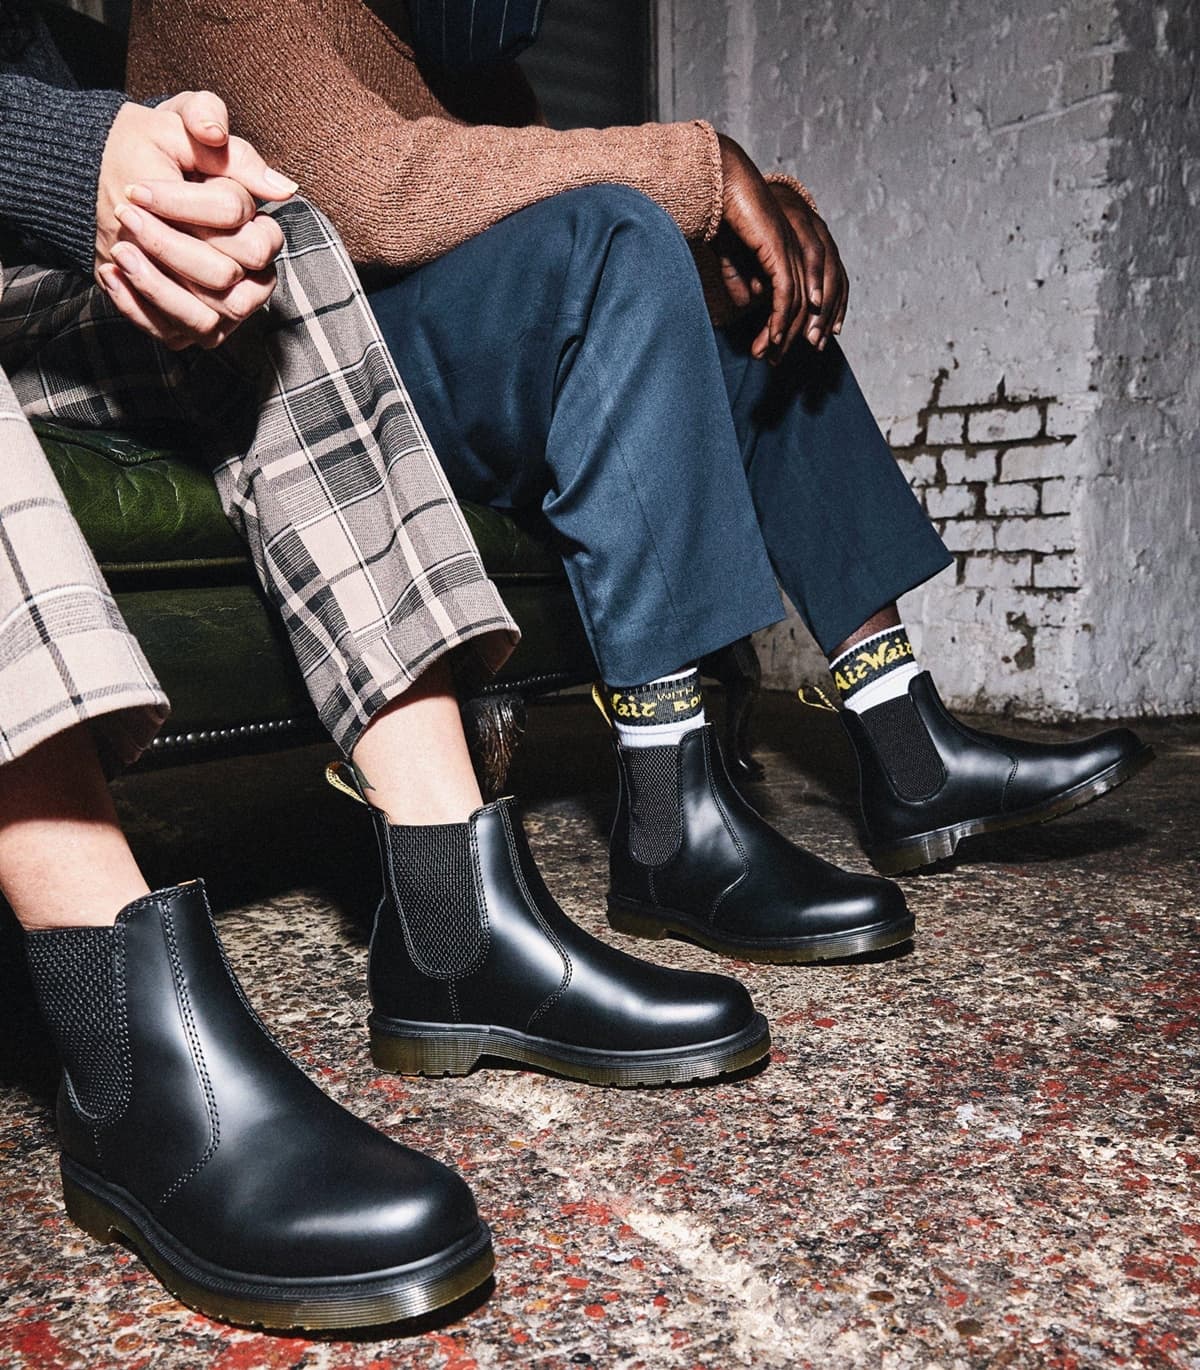 boykot Modtager Bolt 5 Best Dr. Martens Chelsea Boots That Won't Go Out of Style